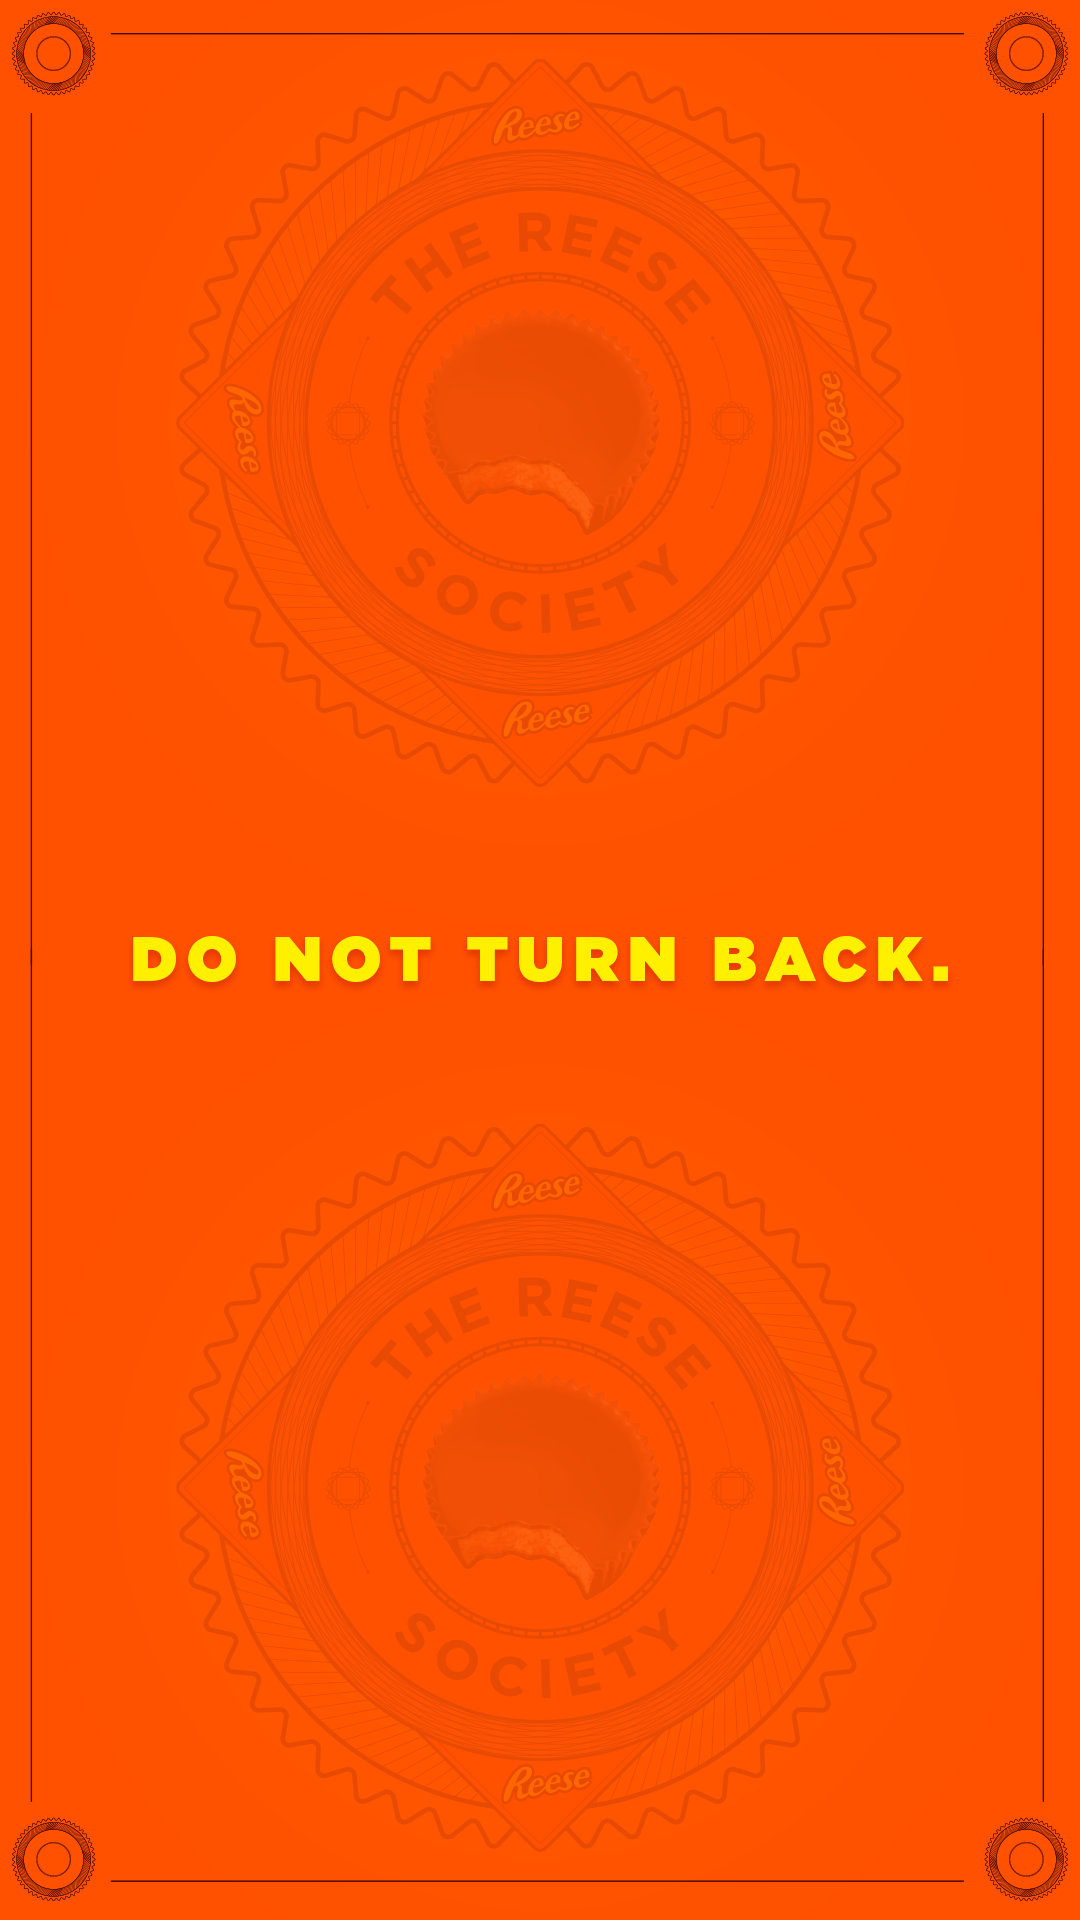 Reese-Society-IG_0097_Do-not-turn-back.png